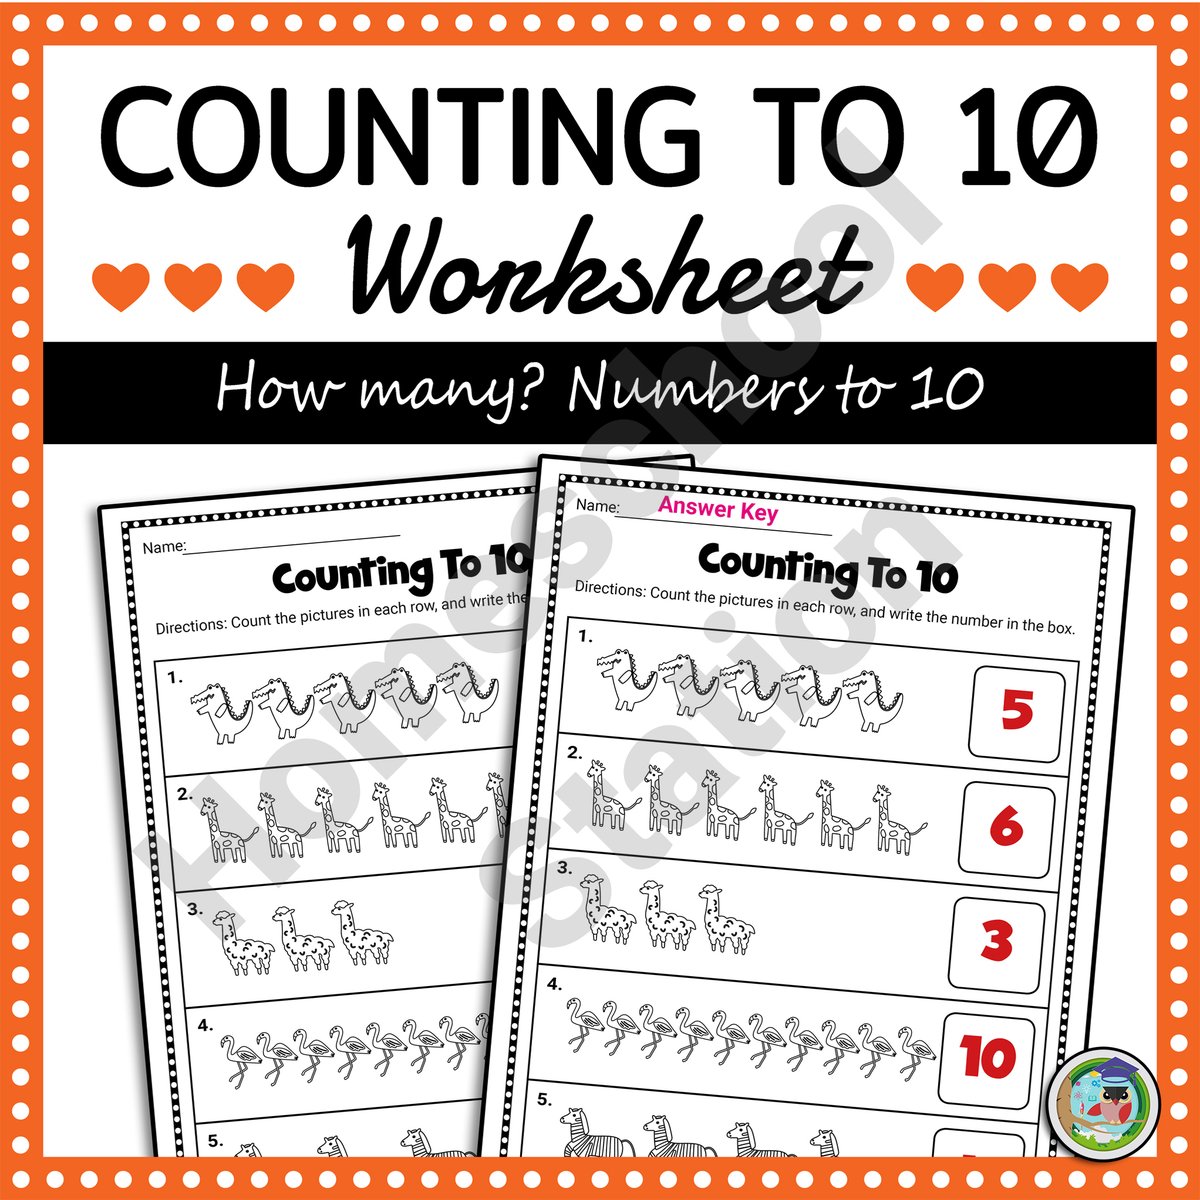 Counting To 10 Worksheets

Download the set:→ bit.ly/3t0GYkK

#countingto10 #printableworksheets #animaltheme #kindergartenmath #firstgrademath #countingpractice #numberrecognition #mathskills #answerkey #skillpractice #homeschooling #distancelearning #morningwork #math